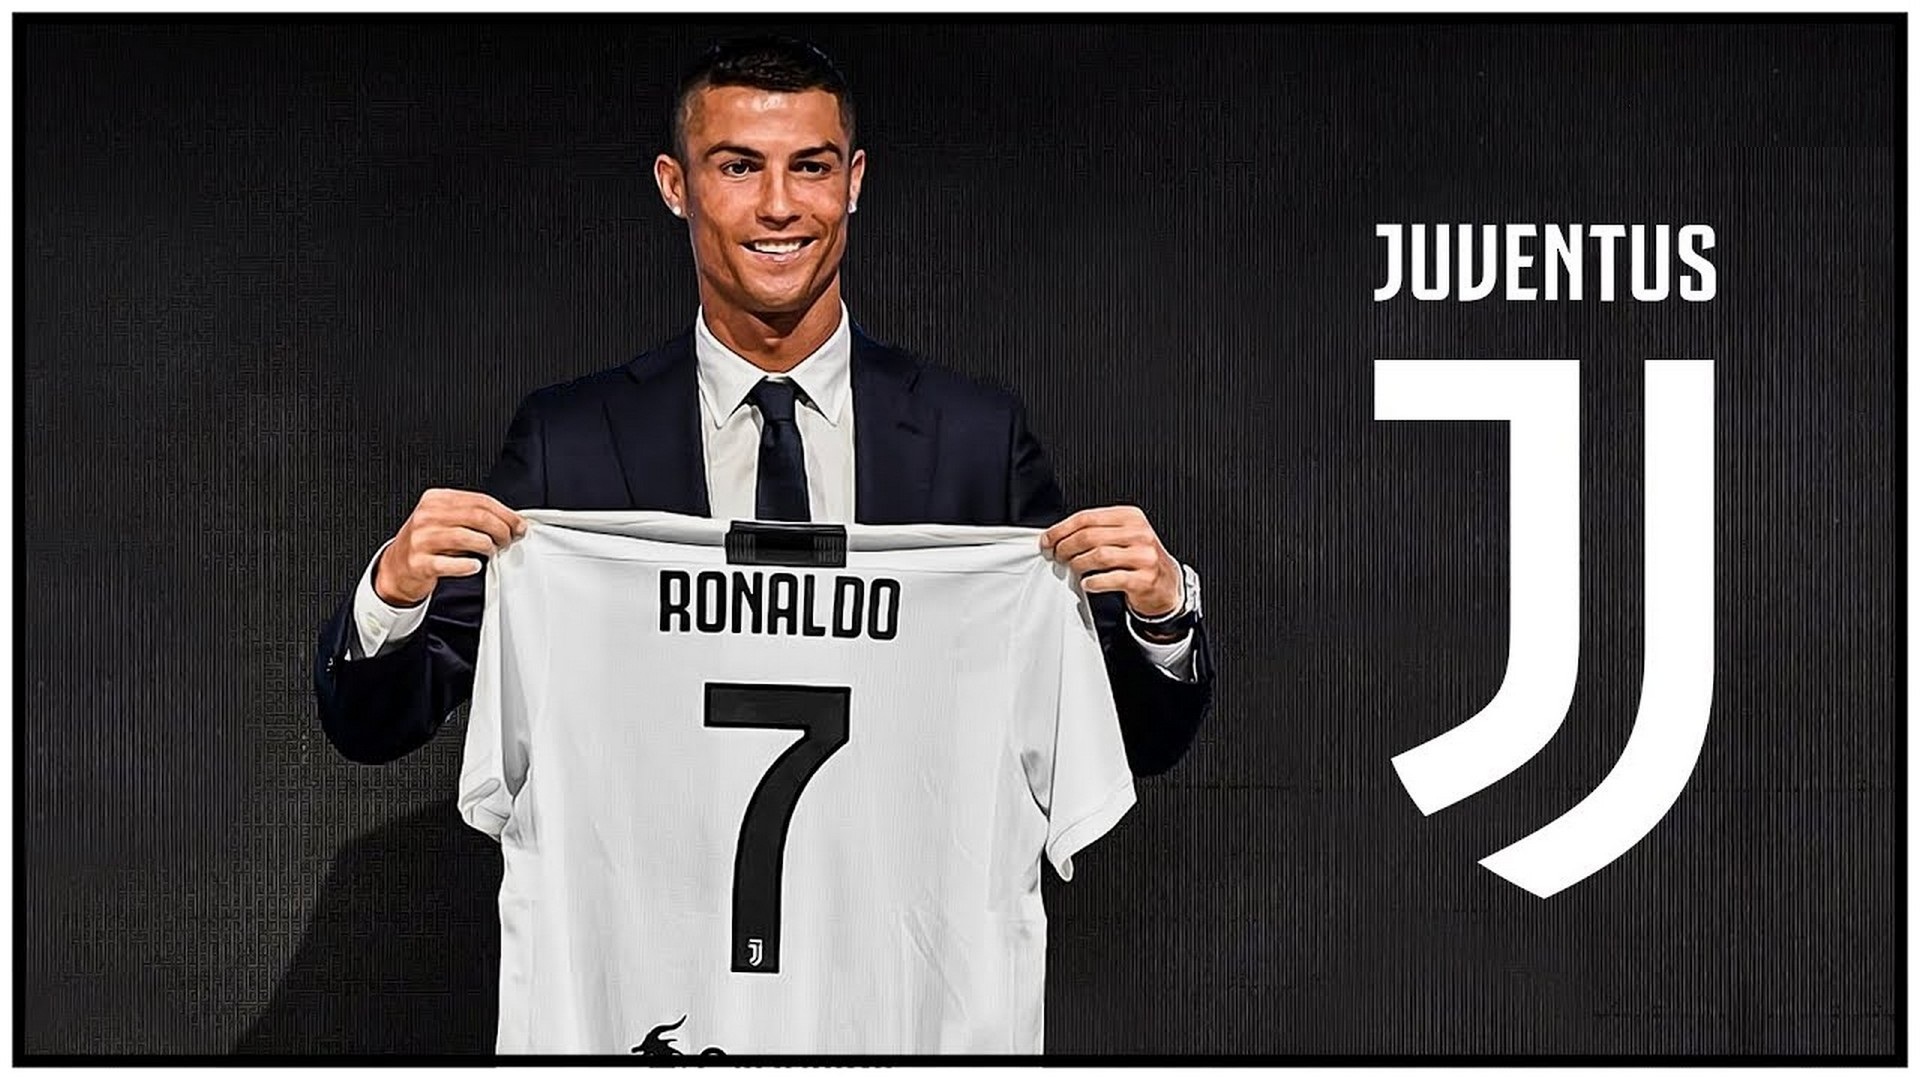 Best Cristiano Ronaldo Juventus Wallpaper with image resolution 1920x1080 pixel. You can use this wallpaper as background for your desktop Computer Screensavers, Android or iPhone smartphones